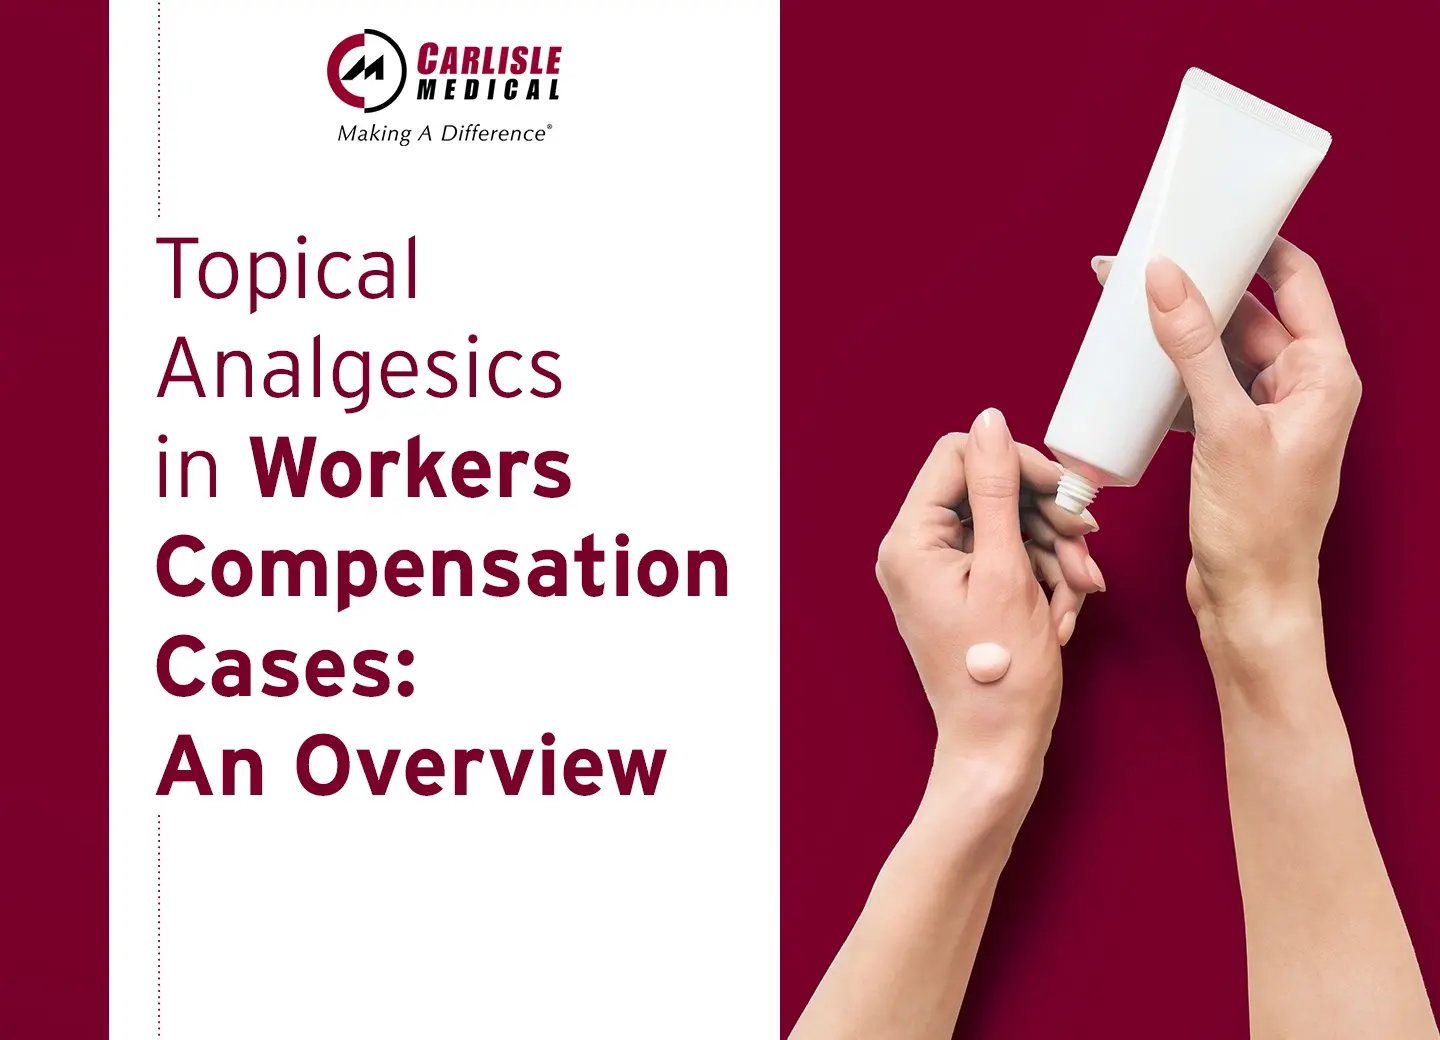 Topical Analgesics in Workers Compensation Cases: An Overview